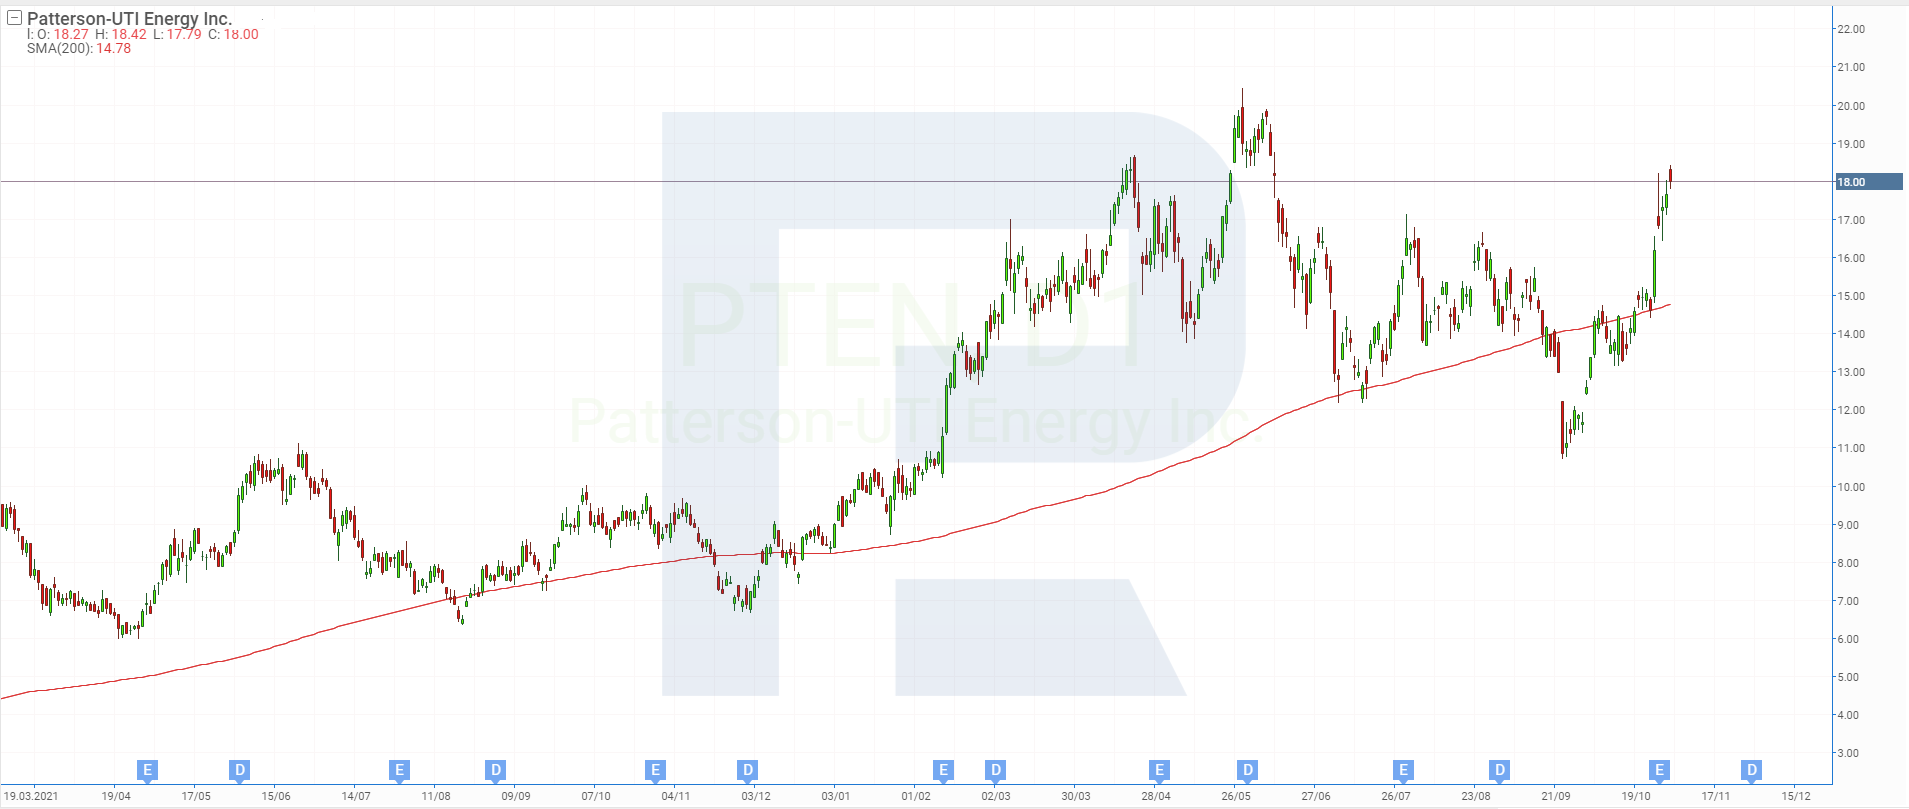 Share price charts of Patterson-UTI Energy